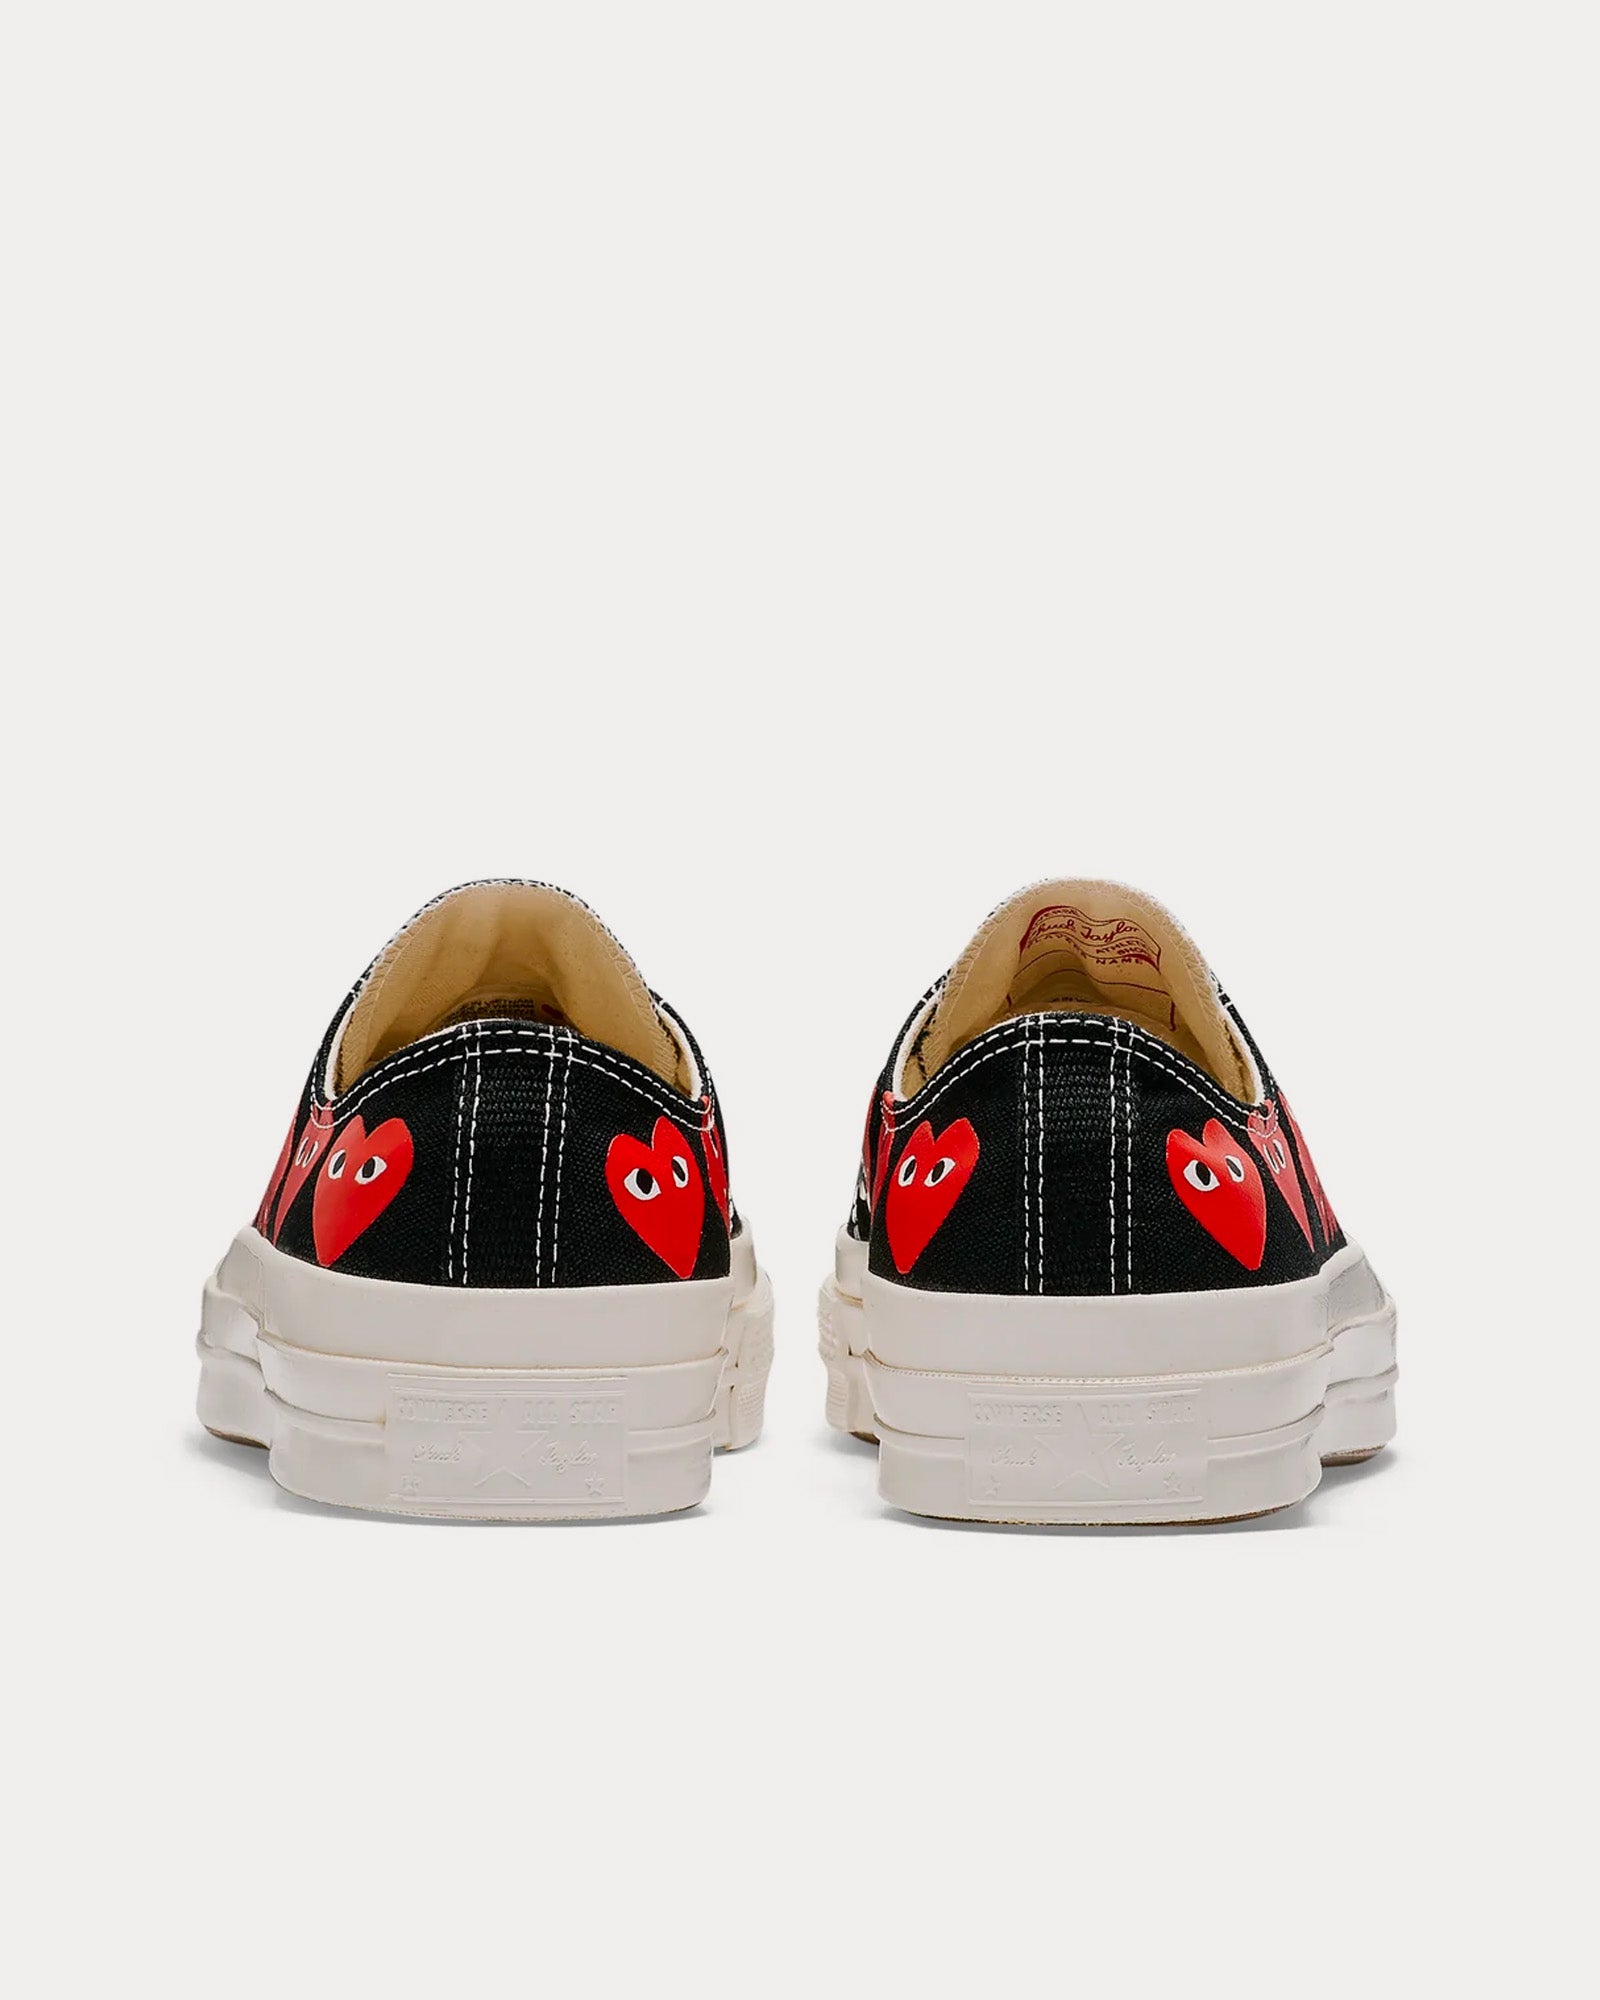 Converse x Comme des Garçons PLAY - Chuck Taylor All Star '70 Multi Heart Black / Red Low Top Sneakers